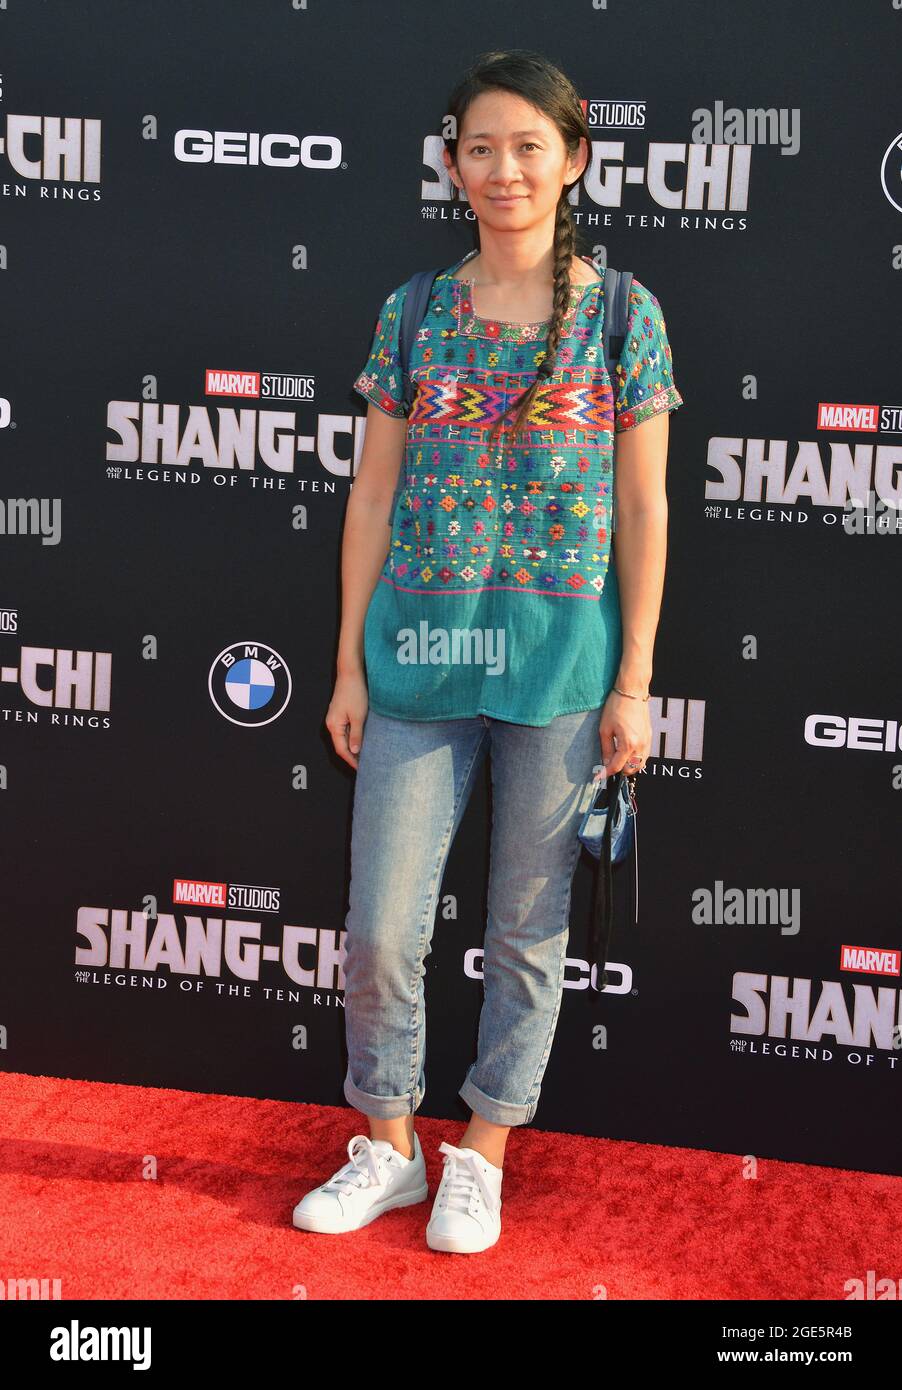 Los Angeles, USA. 17th Aug, 2021. Chloe Zhao attends the Disney Marvel Premiere of Shang-Chi and the Legend of the Ten Rings at the El Capitan Theatre in Los Angeles. August 16, 2021. Credit: Tsuni/USA/Alamy Live News Stock Photo